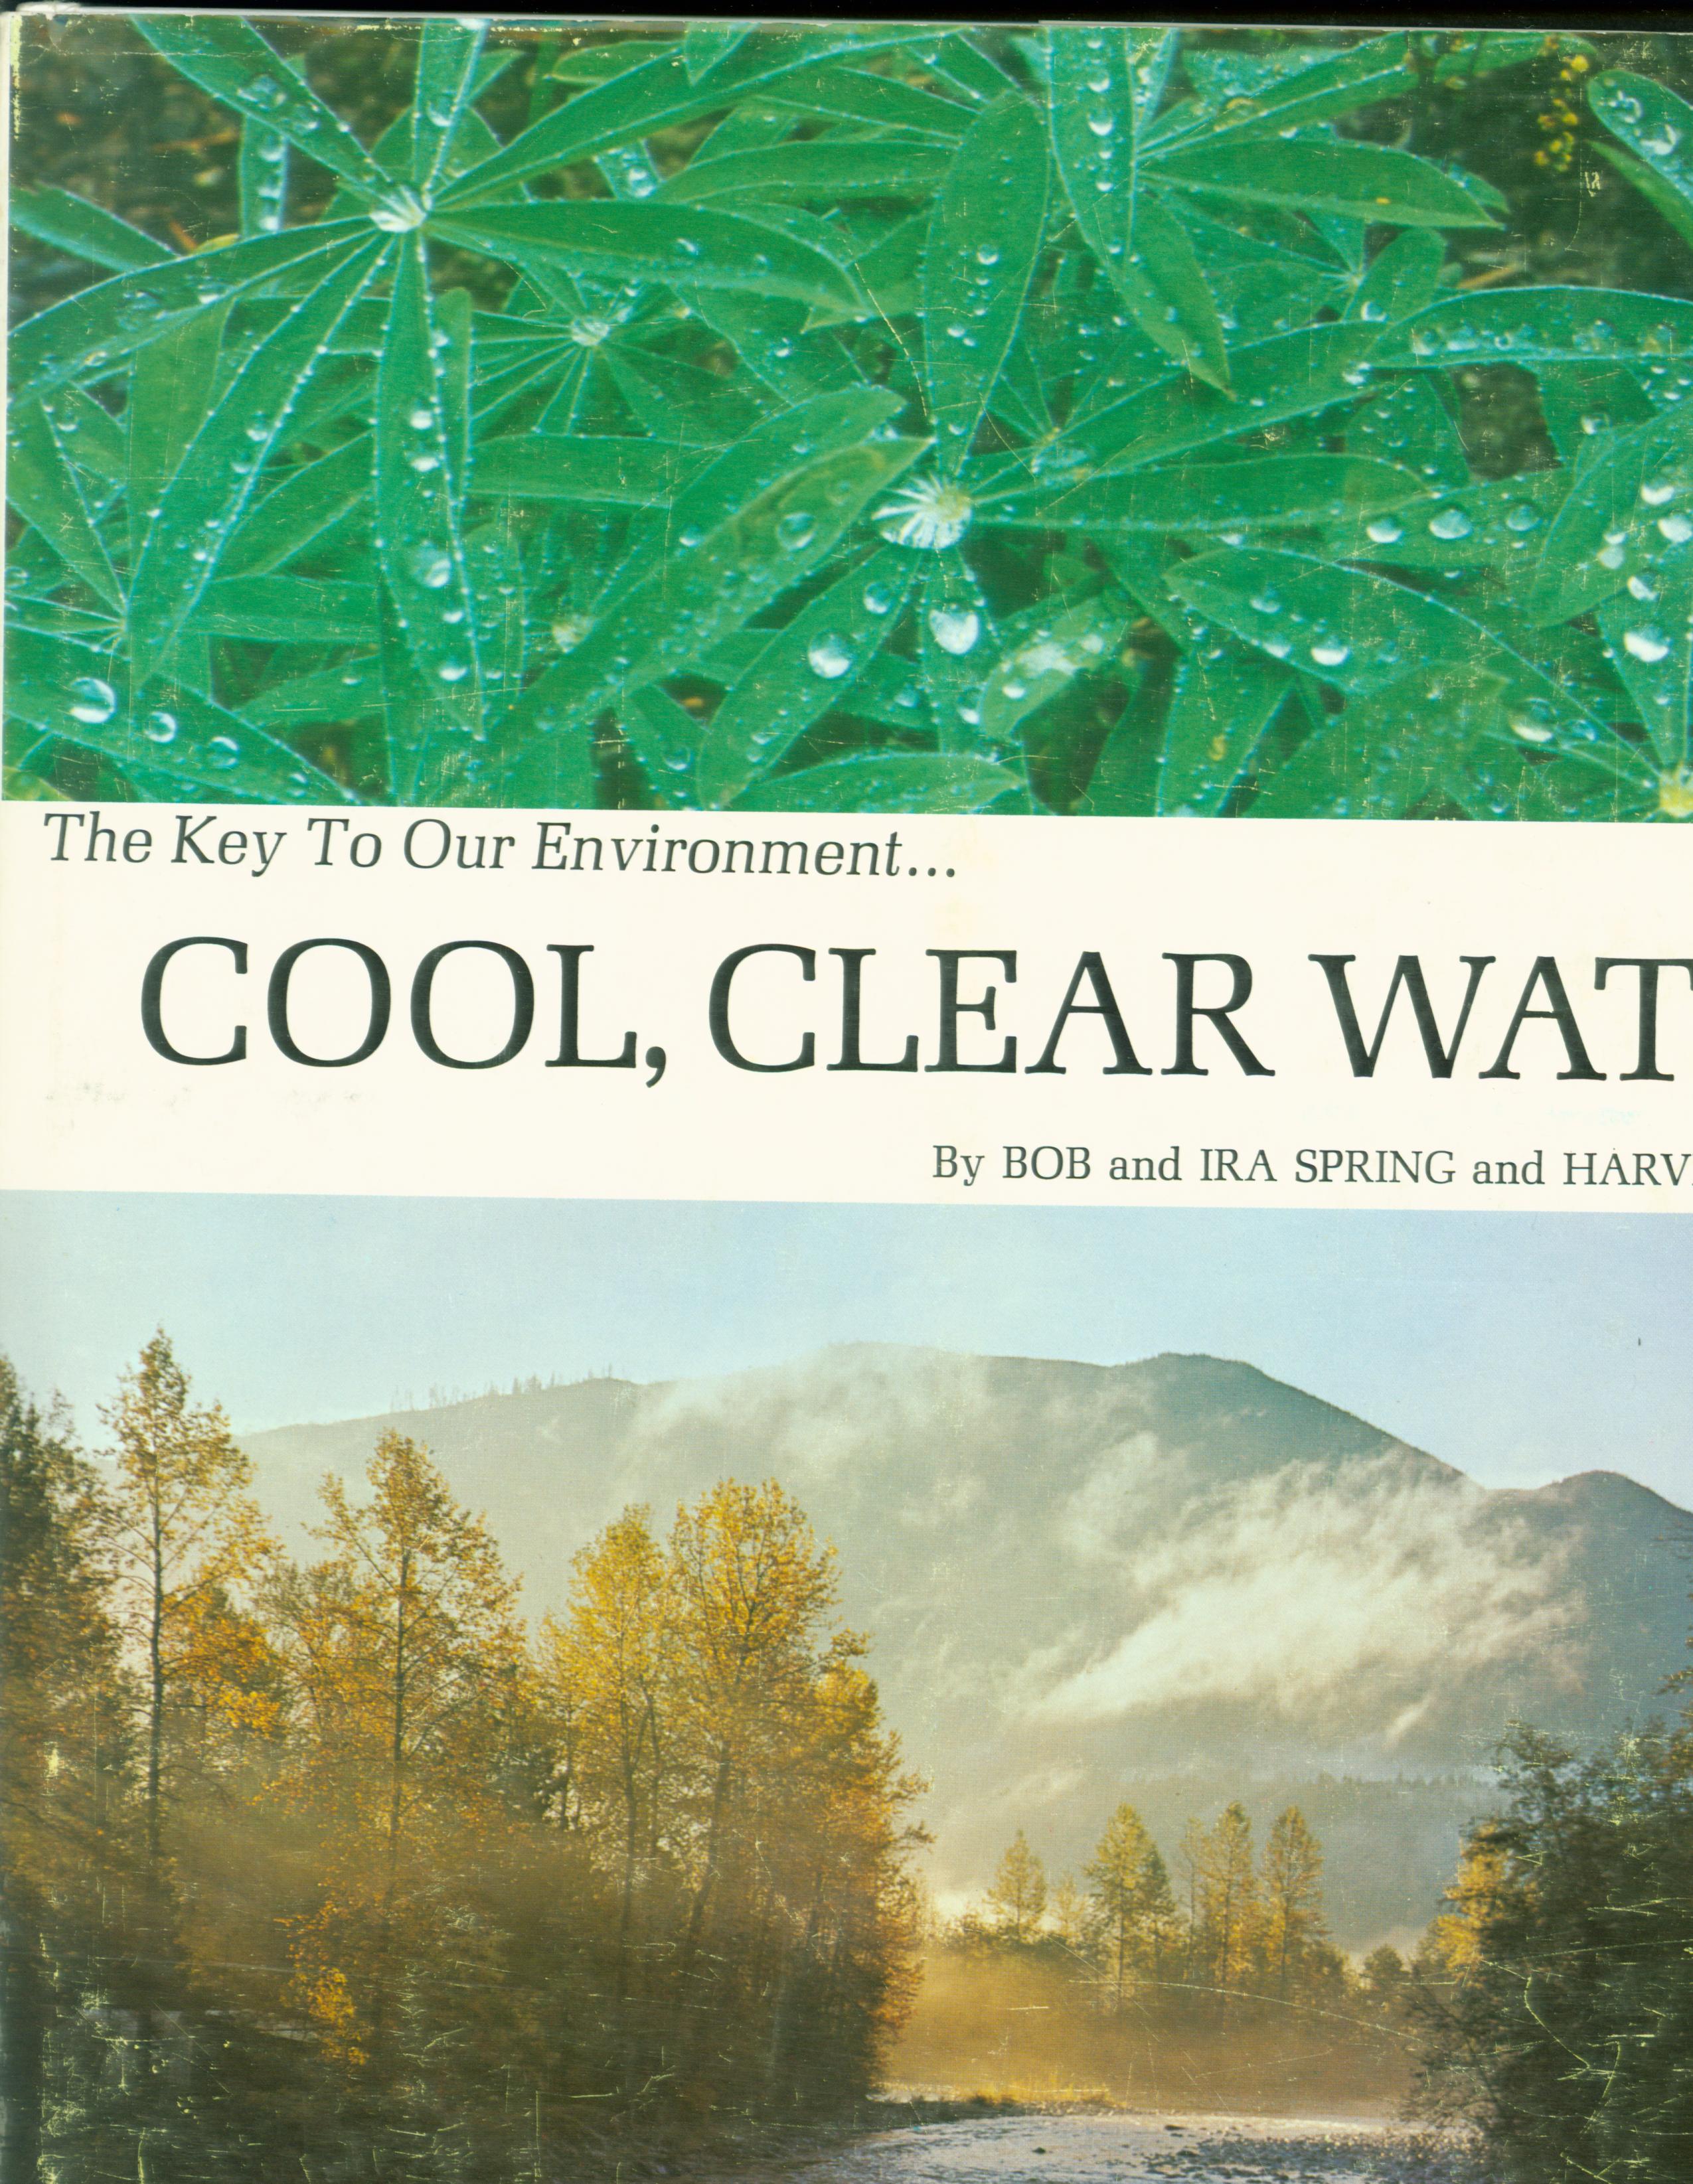 COOL, CLEAR WATER: the key to our environment